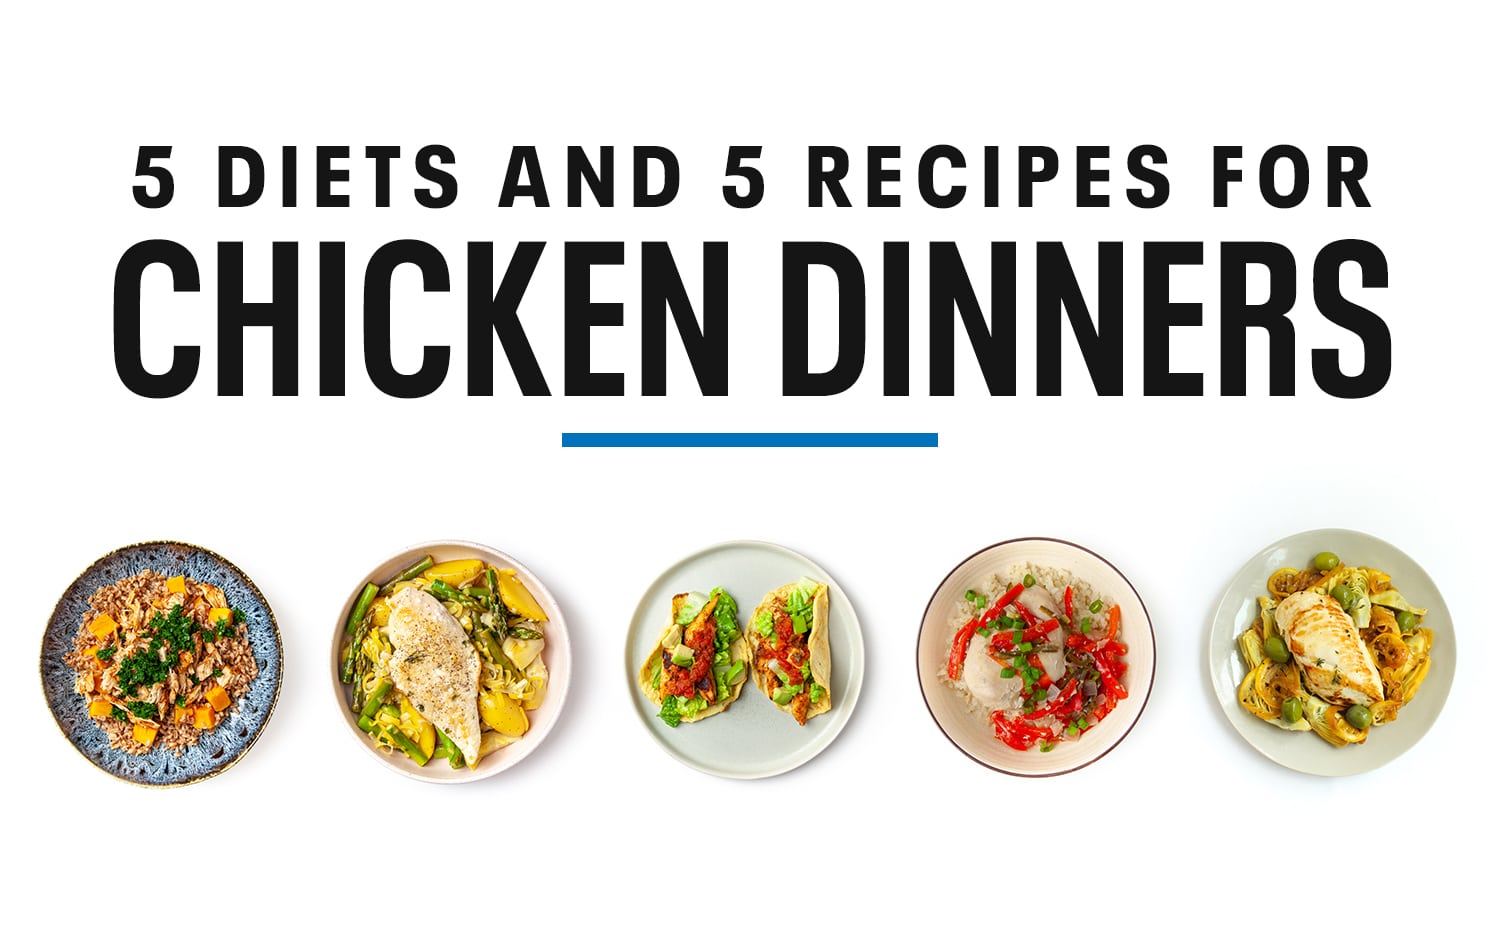 5 Diet-Friendly Recipes for Chicken Dinners